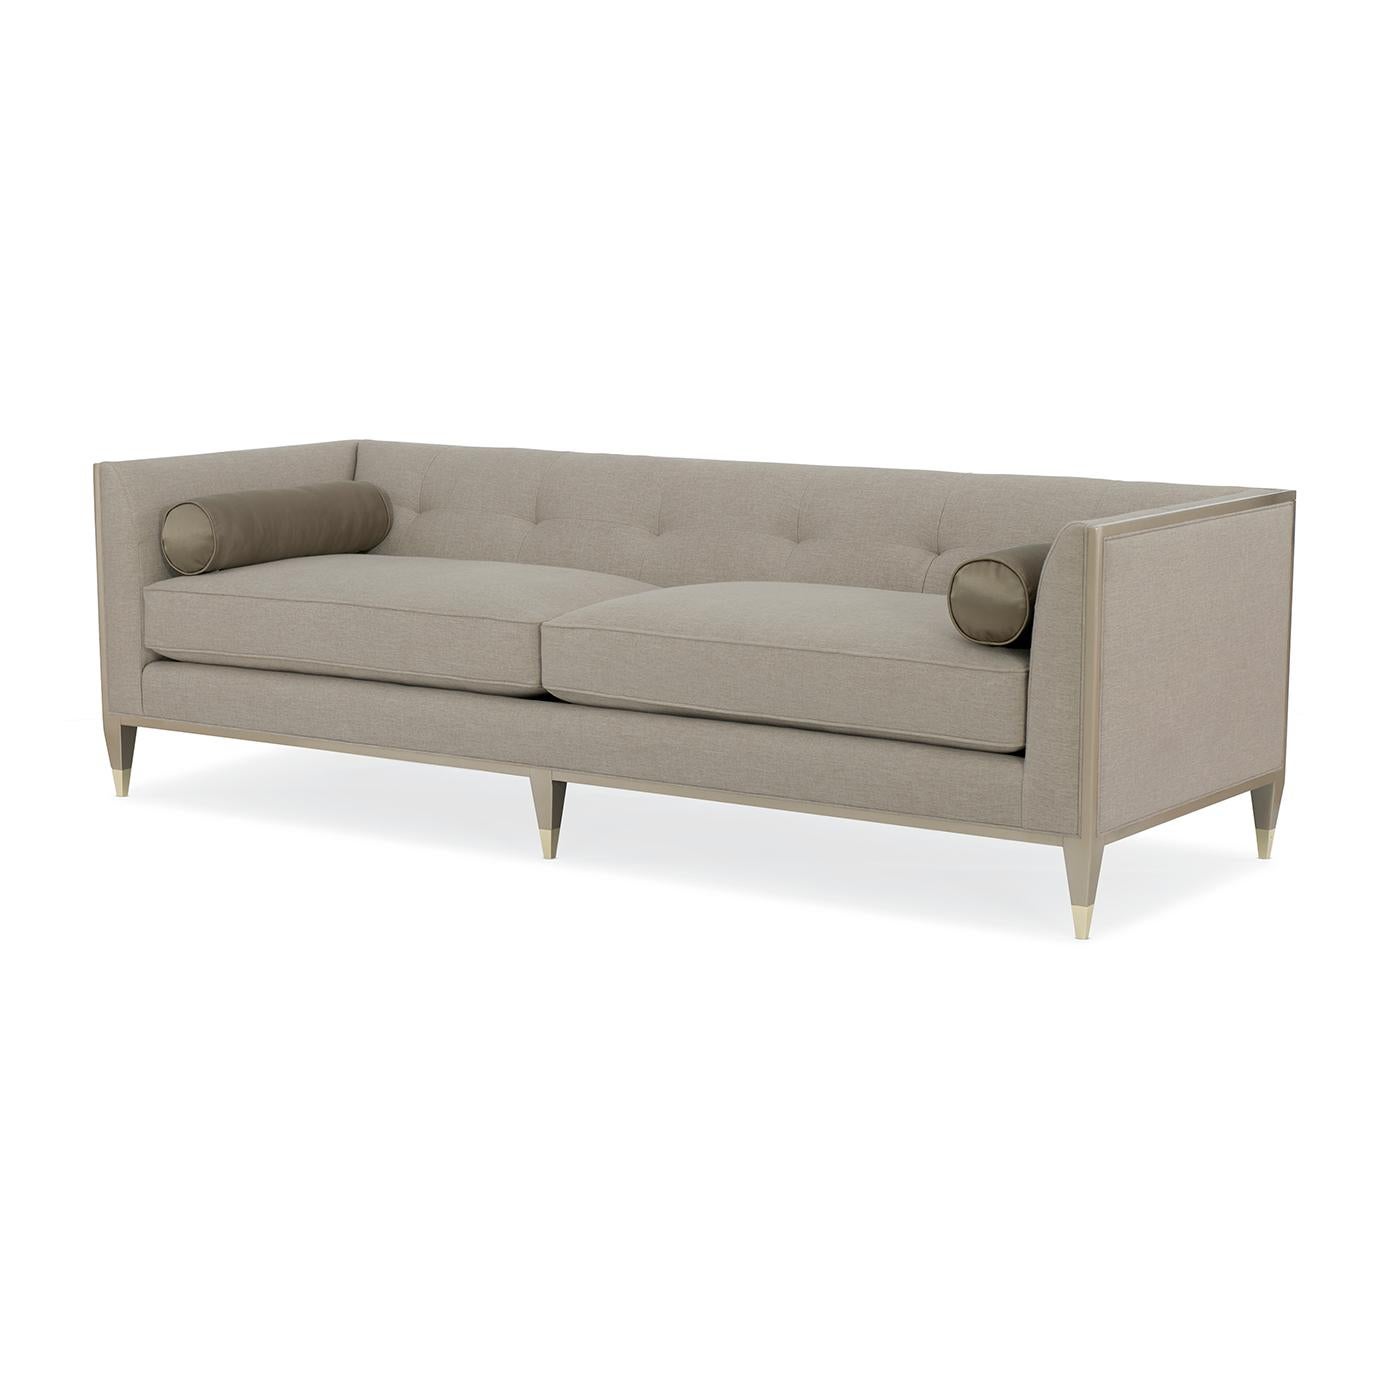 A European Mid-Century sofa. This smart sofa has a streamlined rectangular frame in Taupe Paint that completely surrounds this dapper piece.

Its Mid-Century Modern appeal has been updated with a low European profile, pristine tailoring and modern